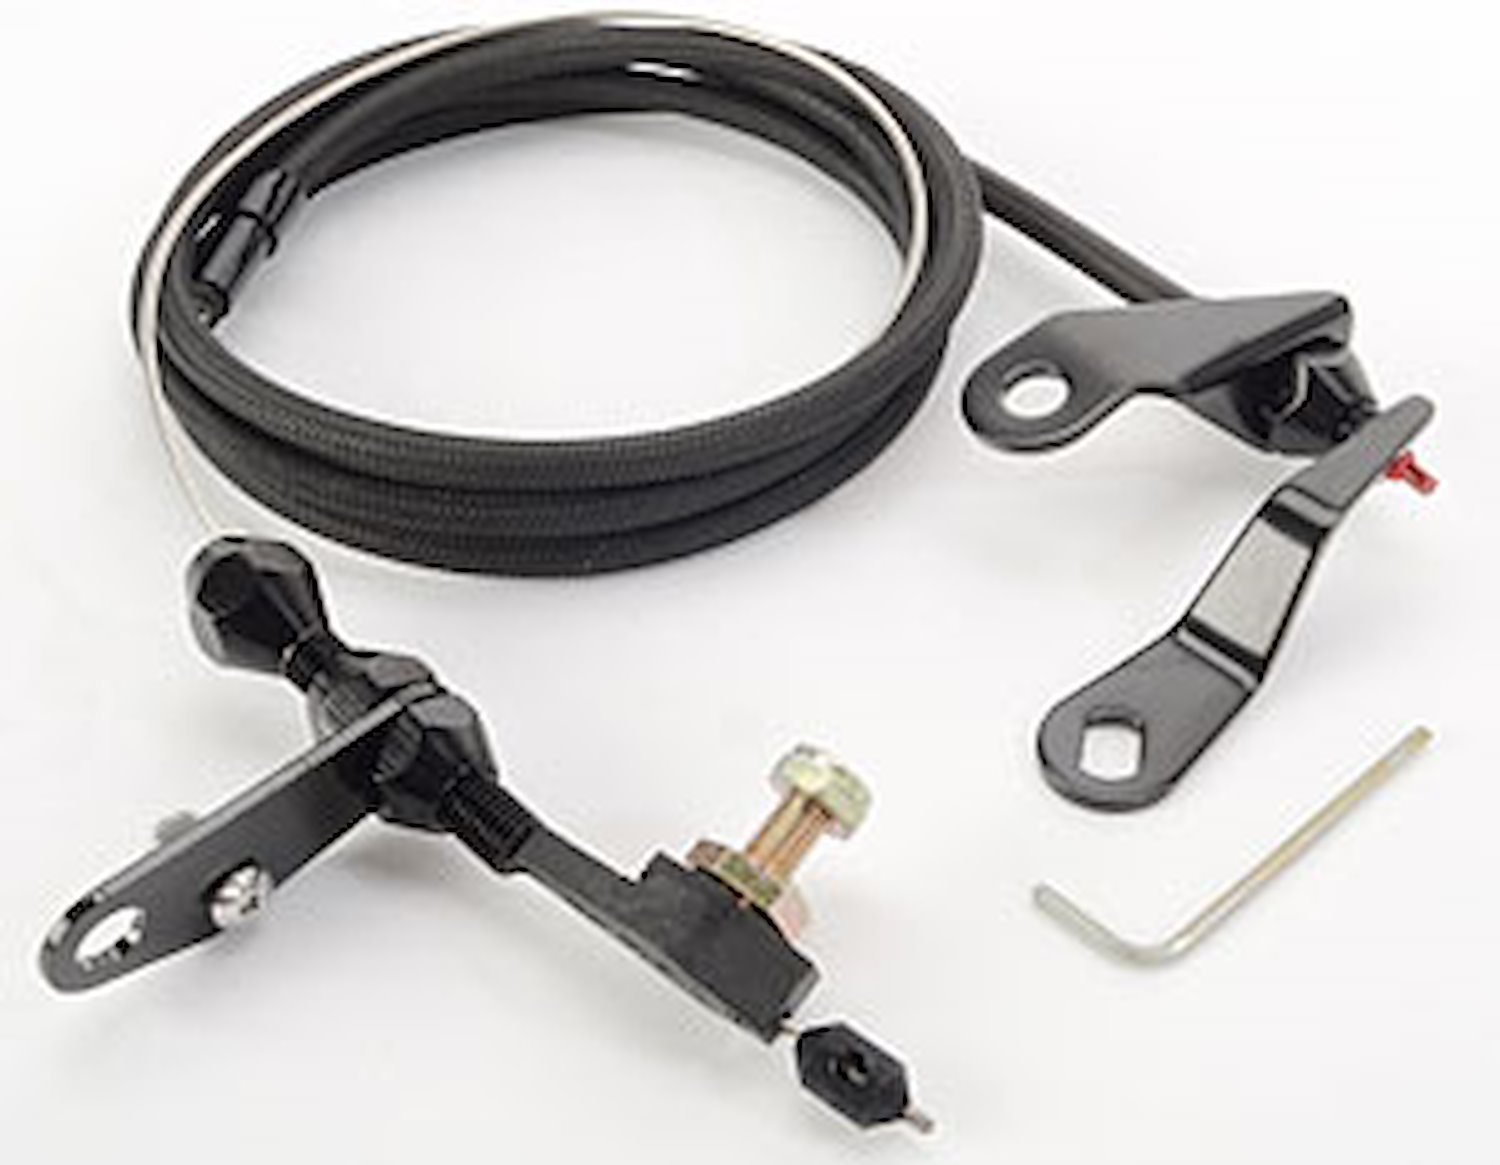 Lokar XKD-20C4TP Kickdown Cable Kit with Black Stainless Steel Housing and Black Aluminum Fittings for Ford C-4 Tuned-Port Transmission Injection 